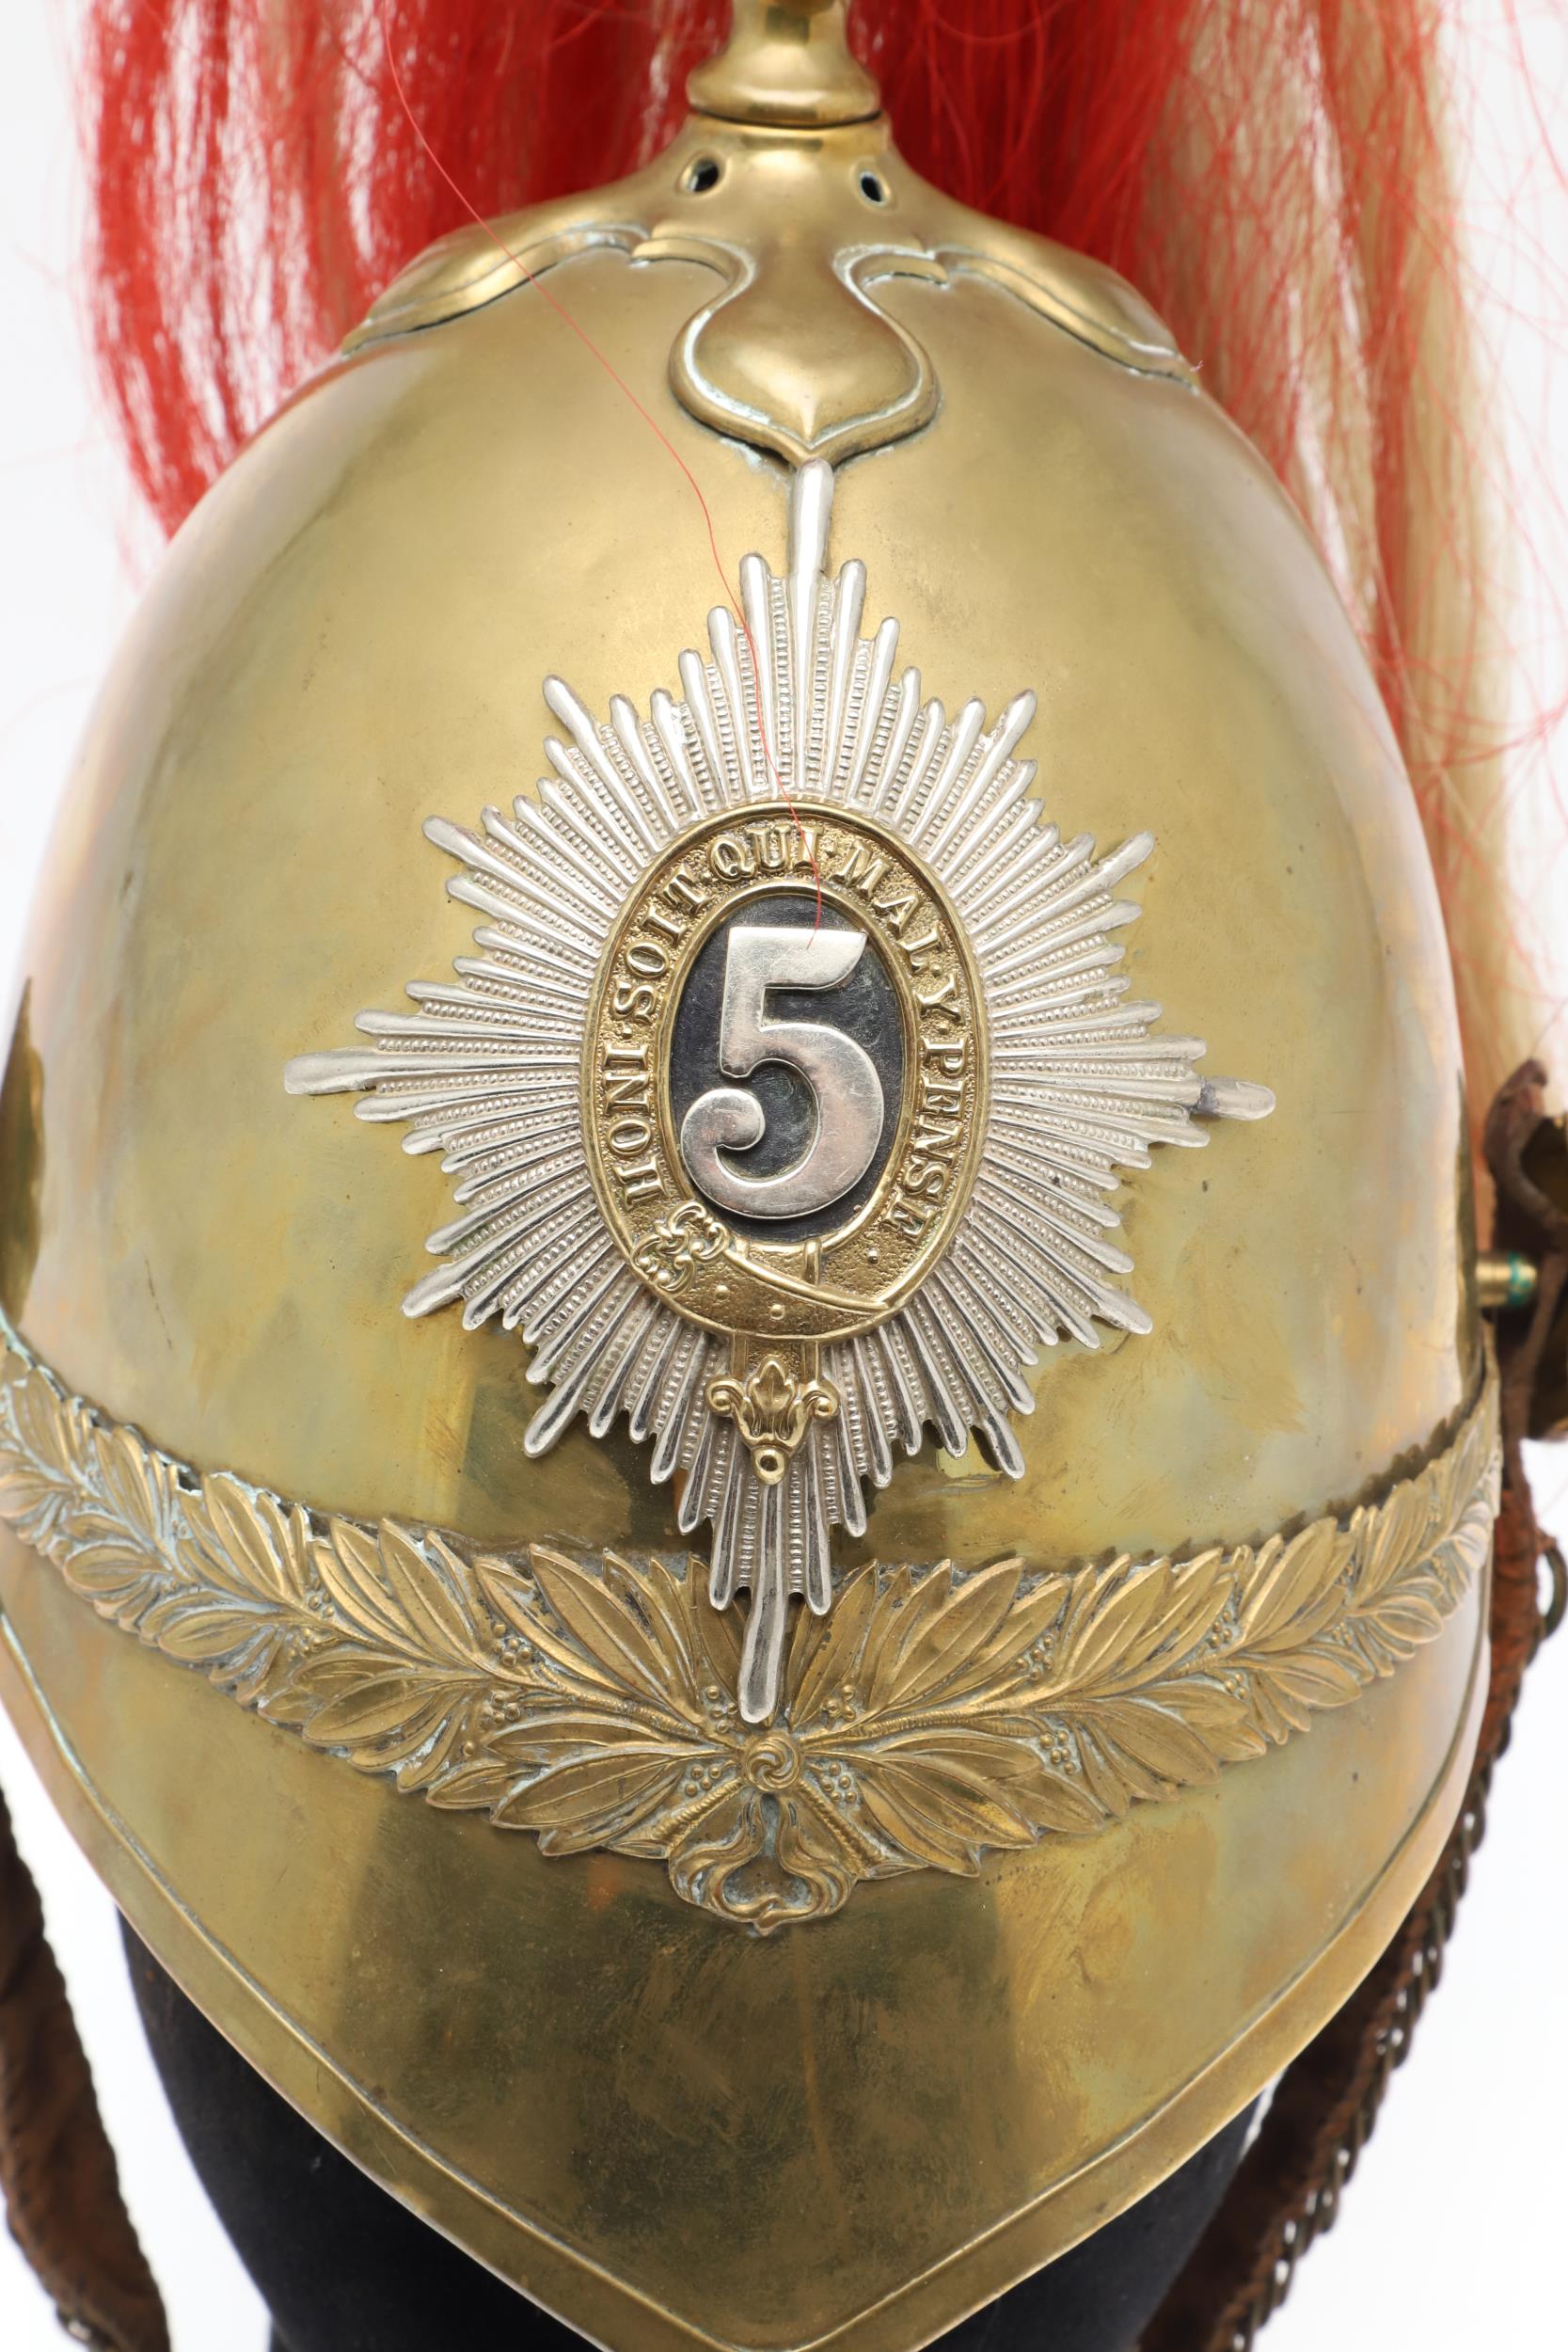 A 5TH DRAGOON GUARDS 1871 PATTERN HELMET. - Image 6 of 15